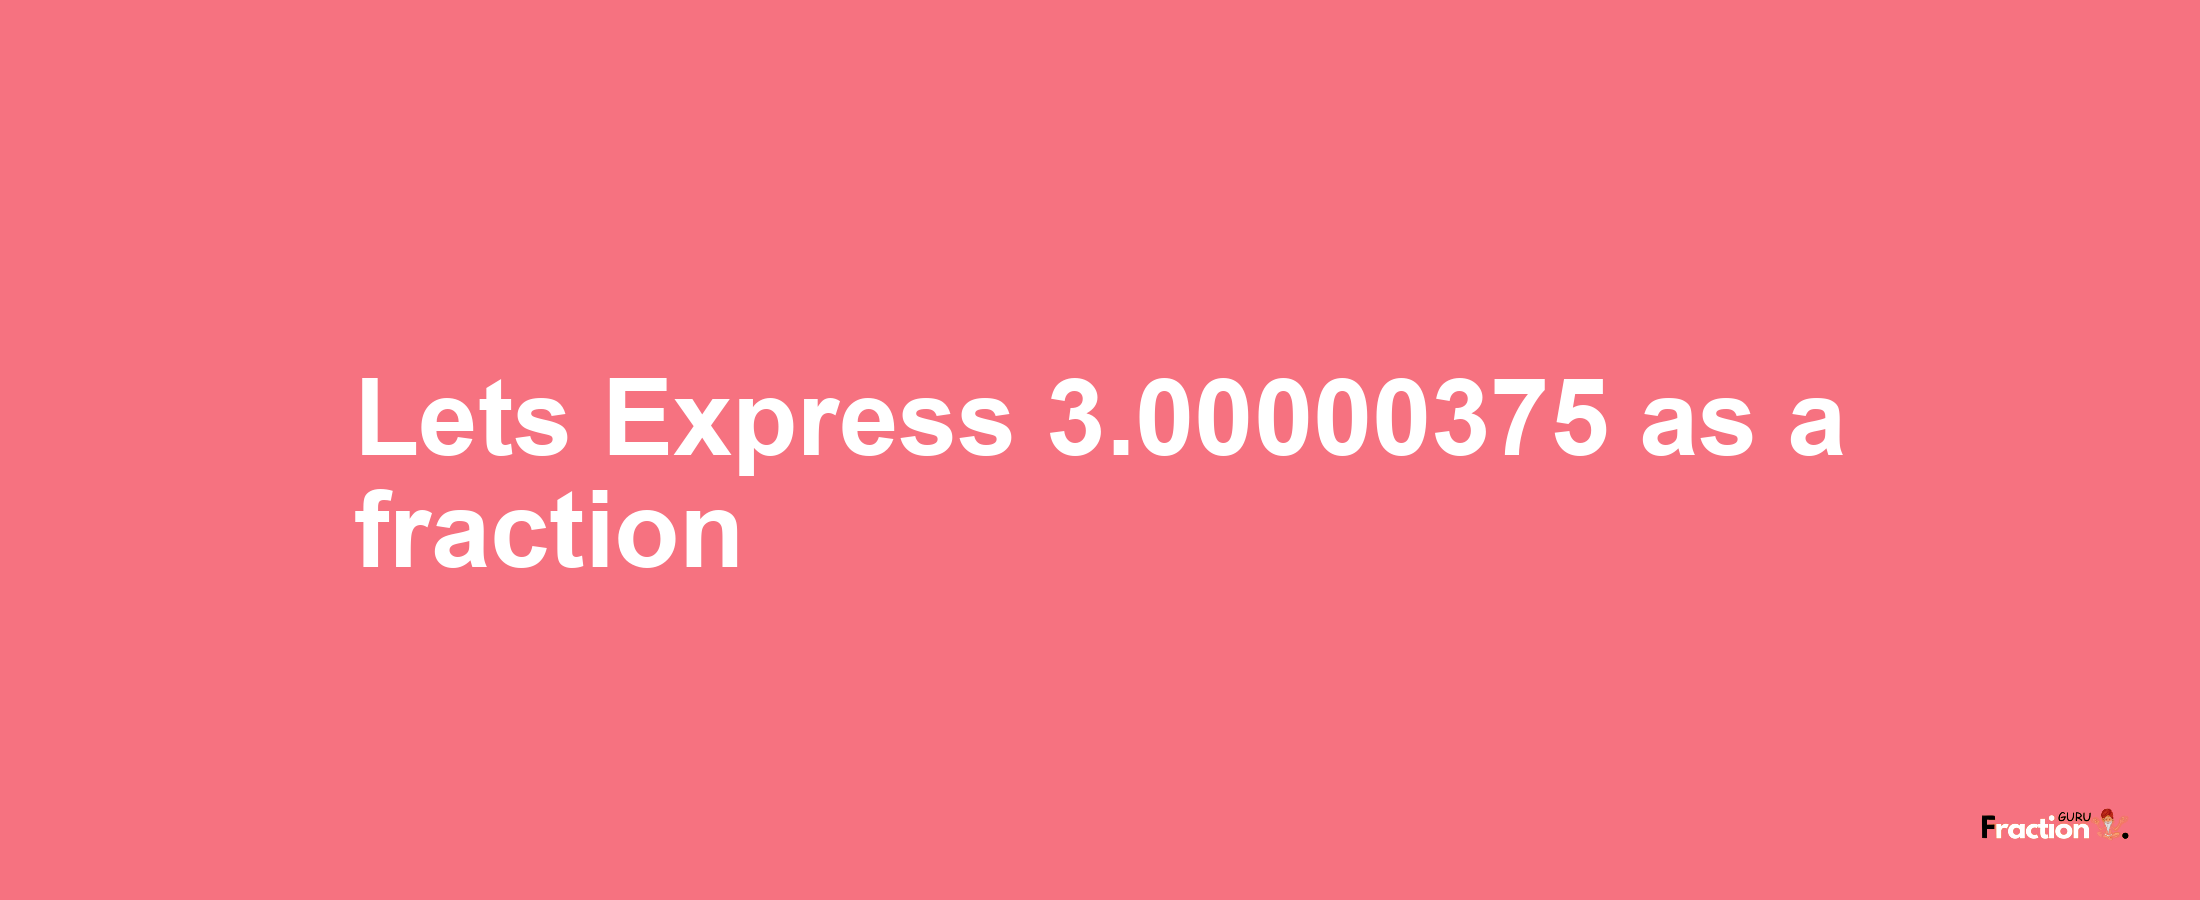 Lets Express 3.00000375 as afraction